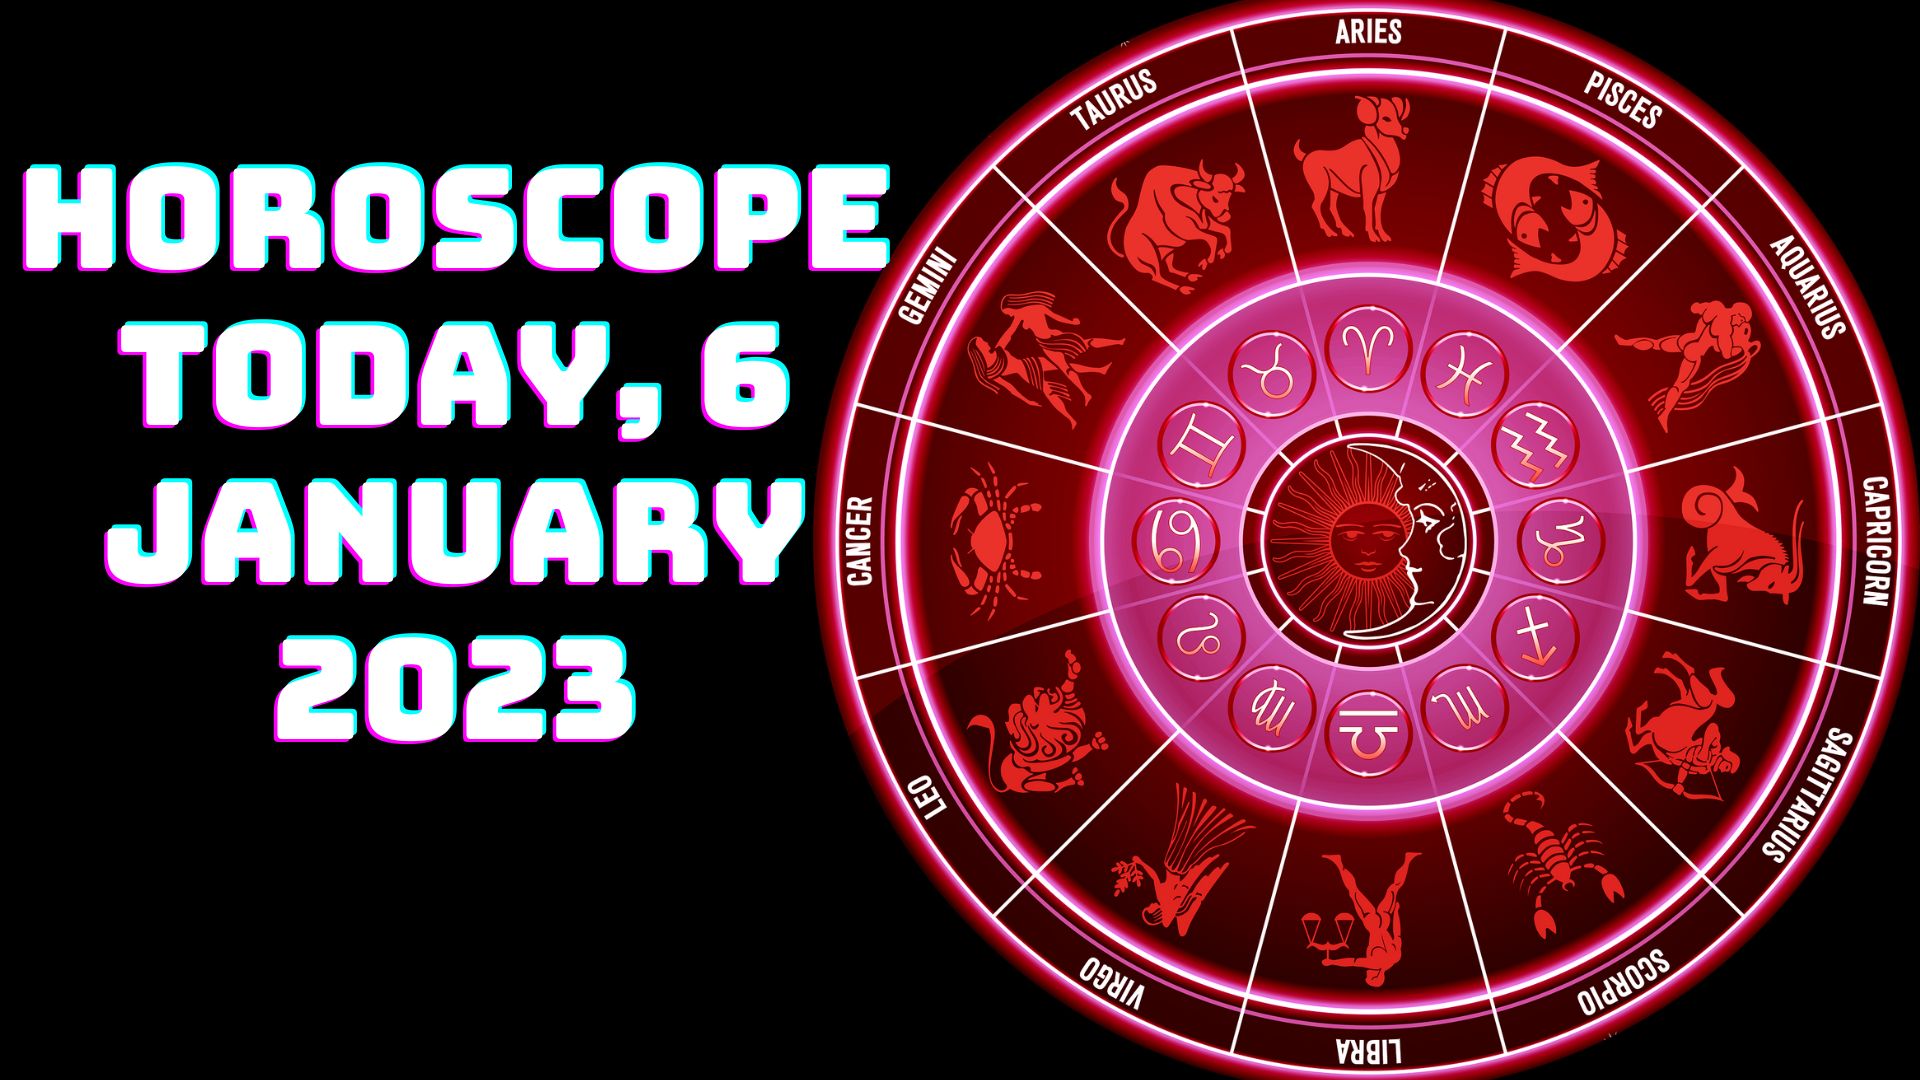 Horoscope Today, 6 January 2023 - Check Here Astrological Prediction For All Zodiac Signs